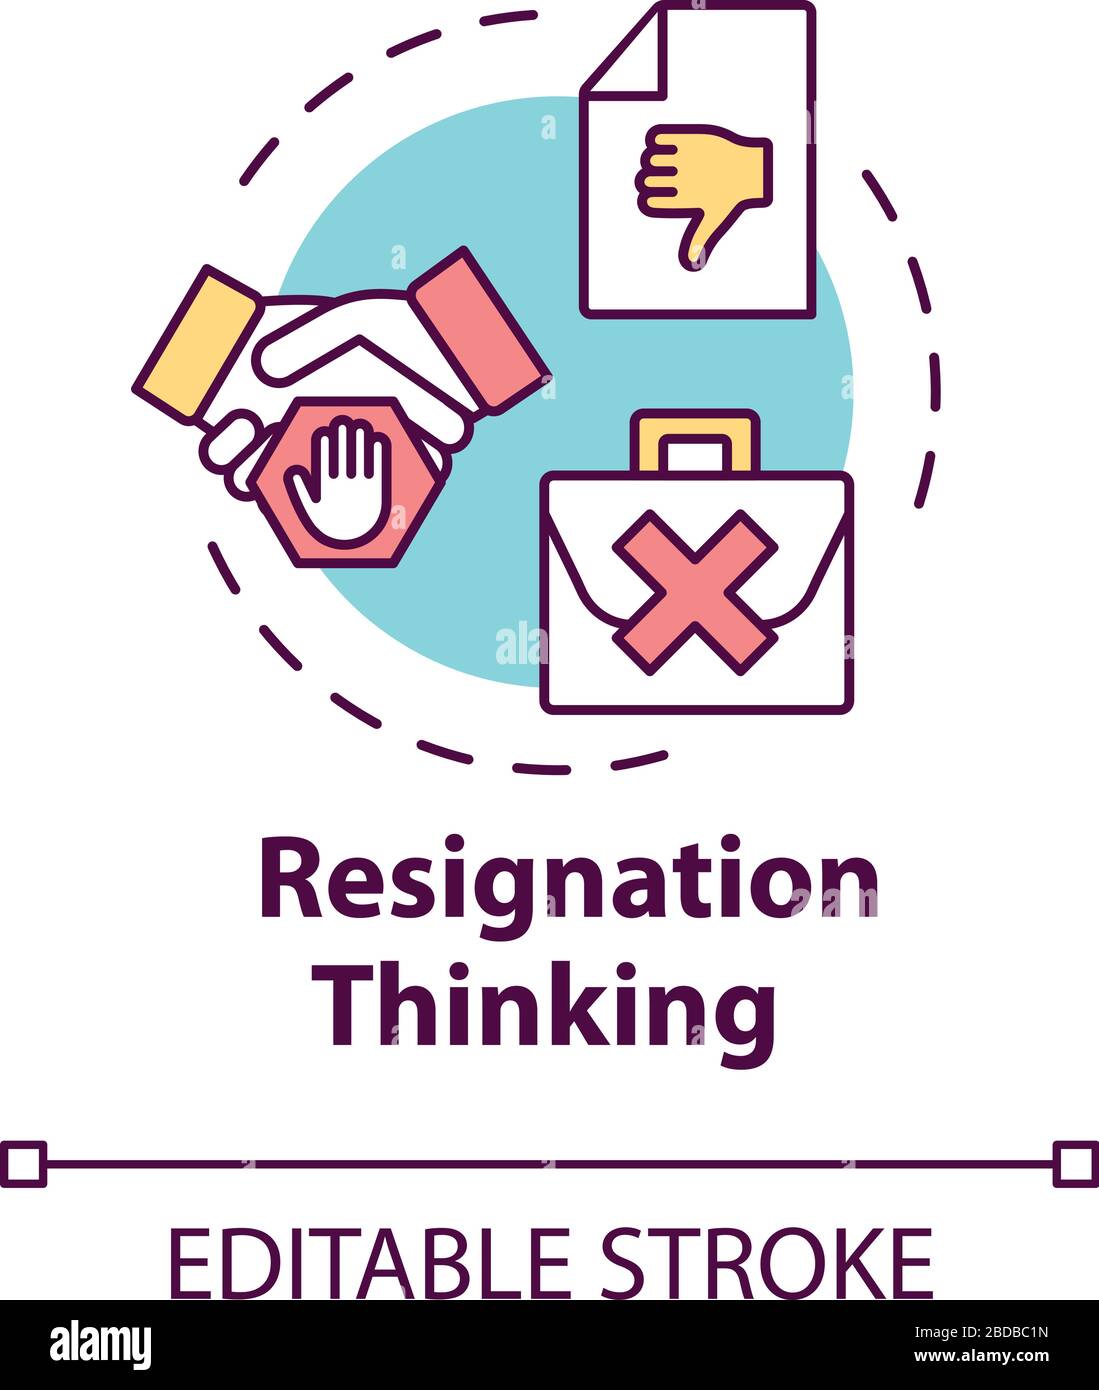 Resignation thinking concept icon. Failure at work. Corporate conflict. Dismissed from position. Burnout symptom idea thin line illustration. Vector Stock Vector